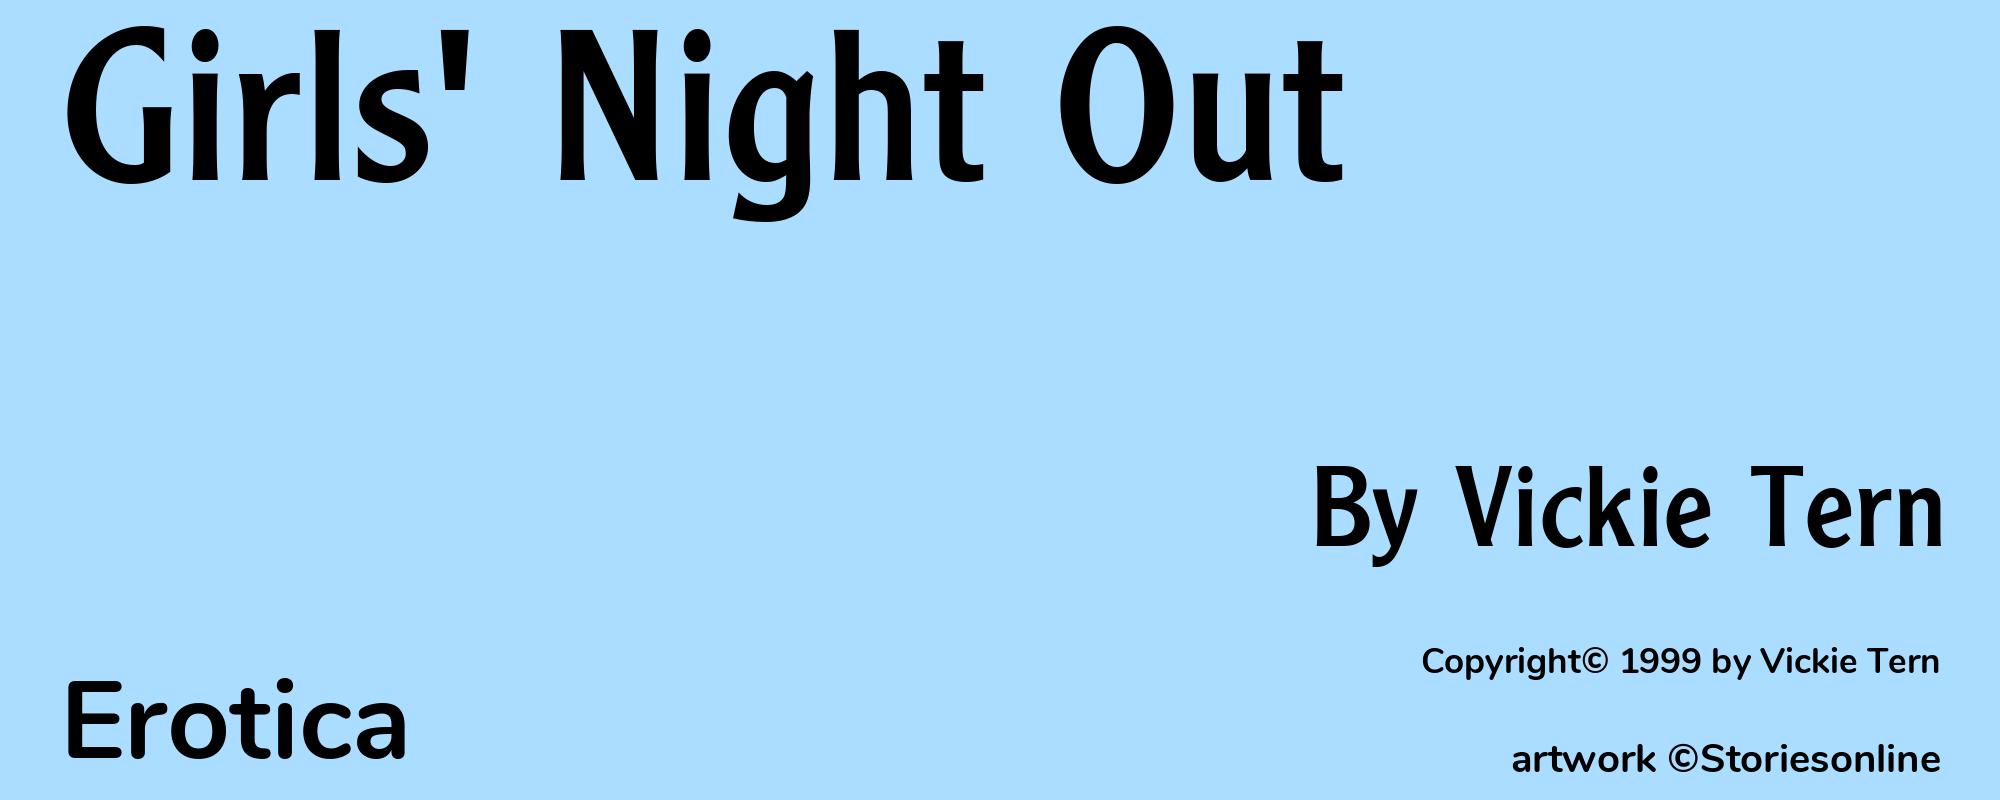 Girls' Night Out - Cover